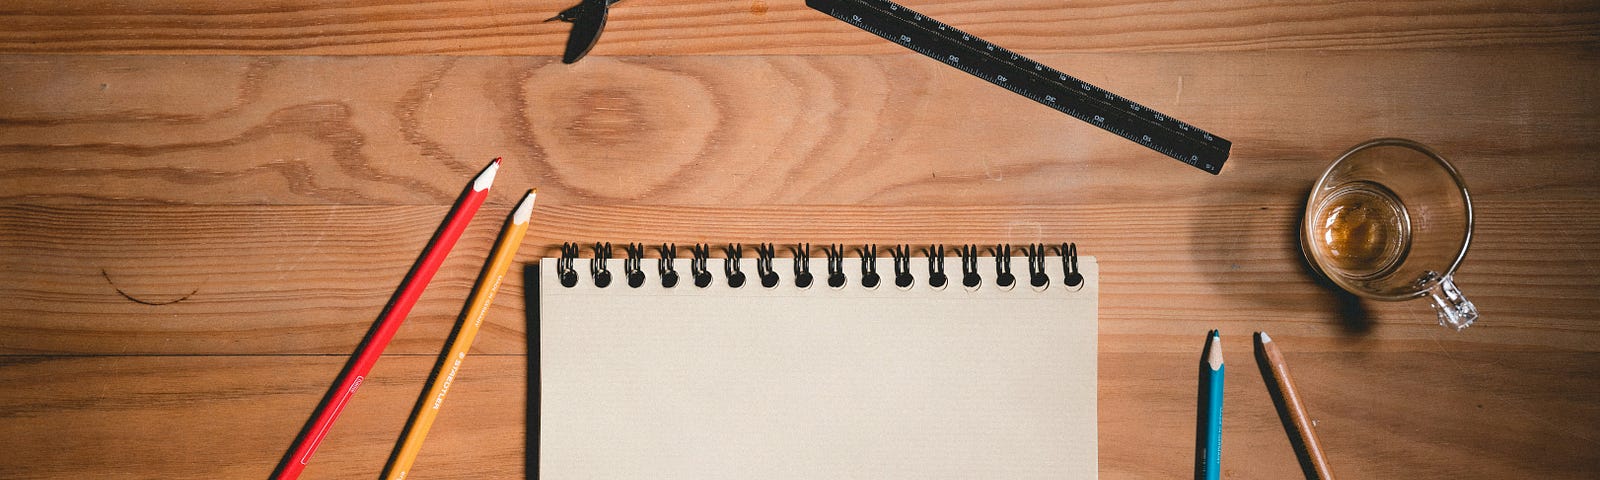 A sketchbook with pencils, pens, and a compass sit on a wooden table. An empty glass mug sits to the right of the notebook.